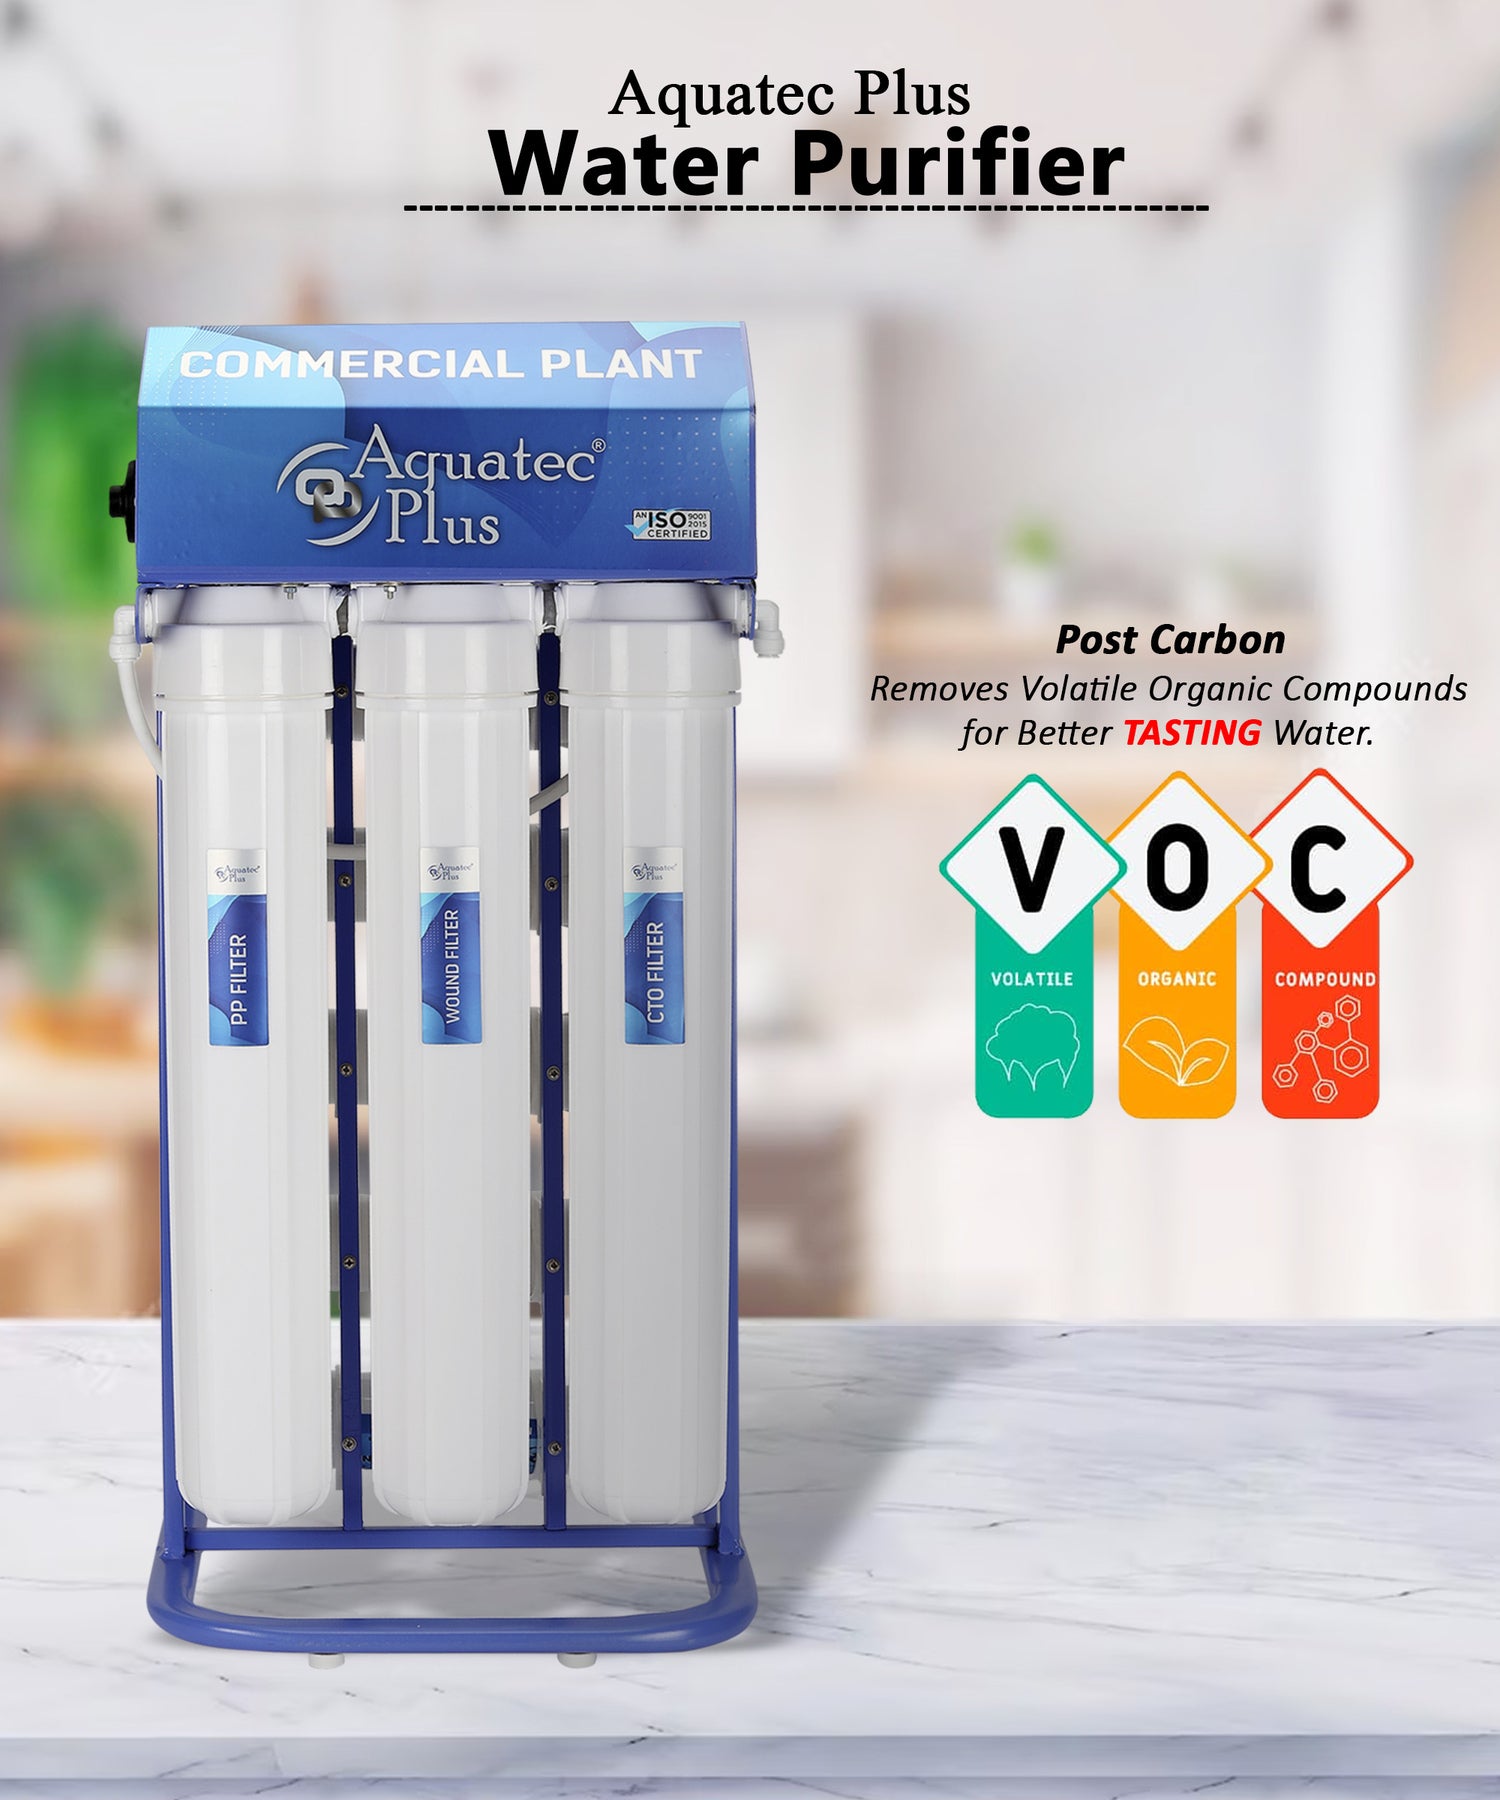 WATER PURIFIER COMMERCIAL